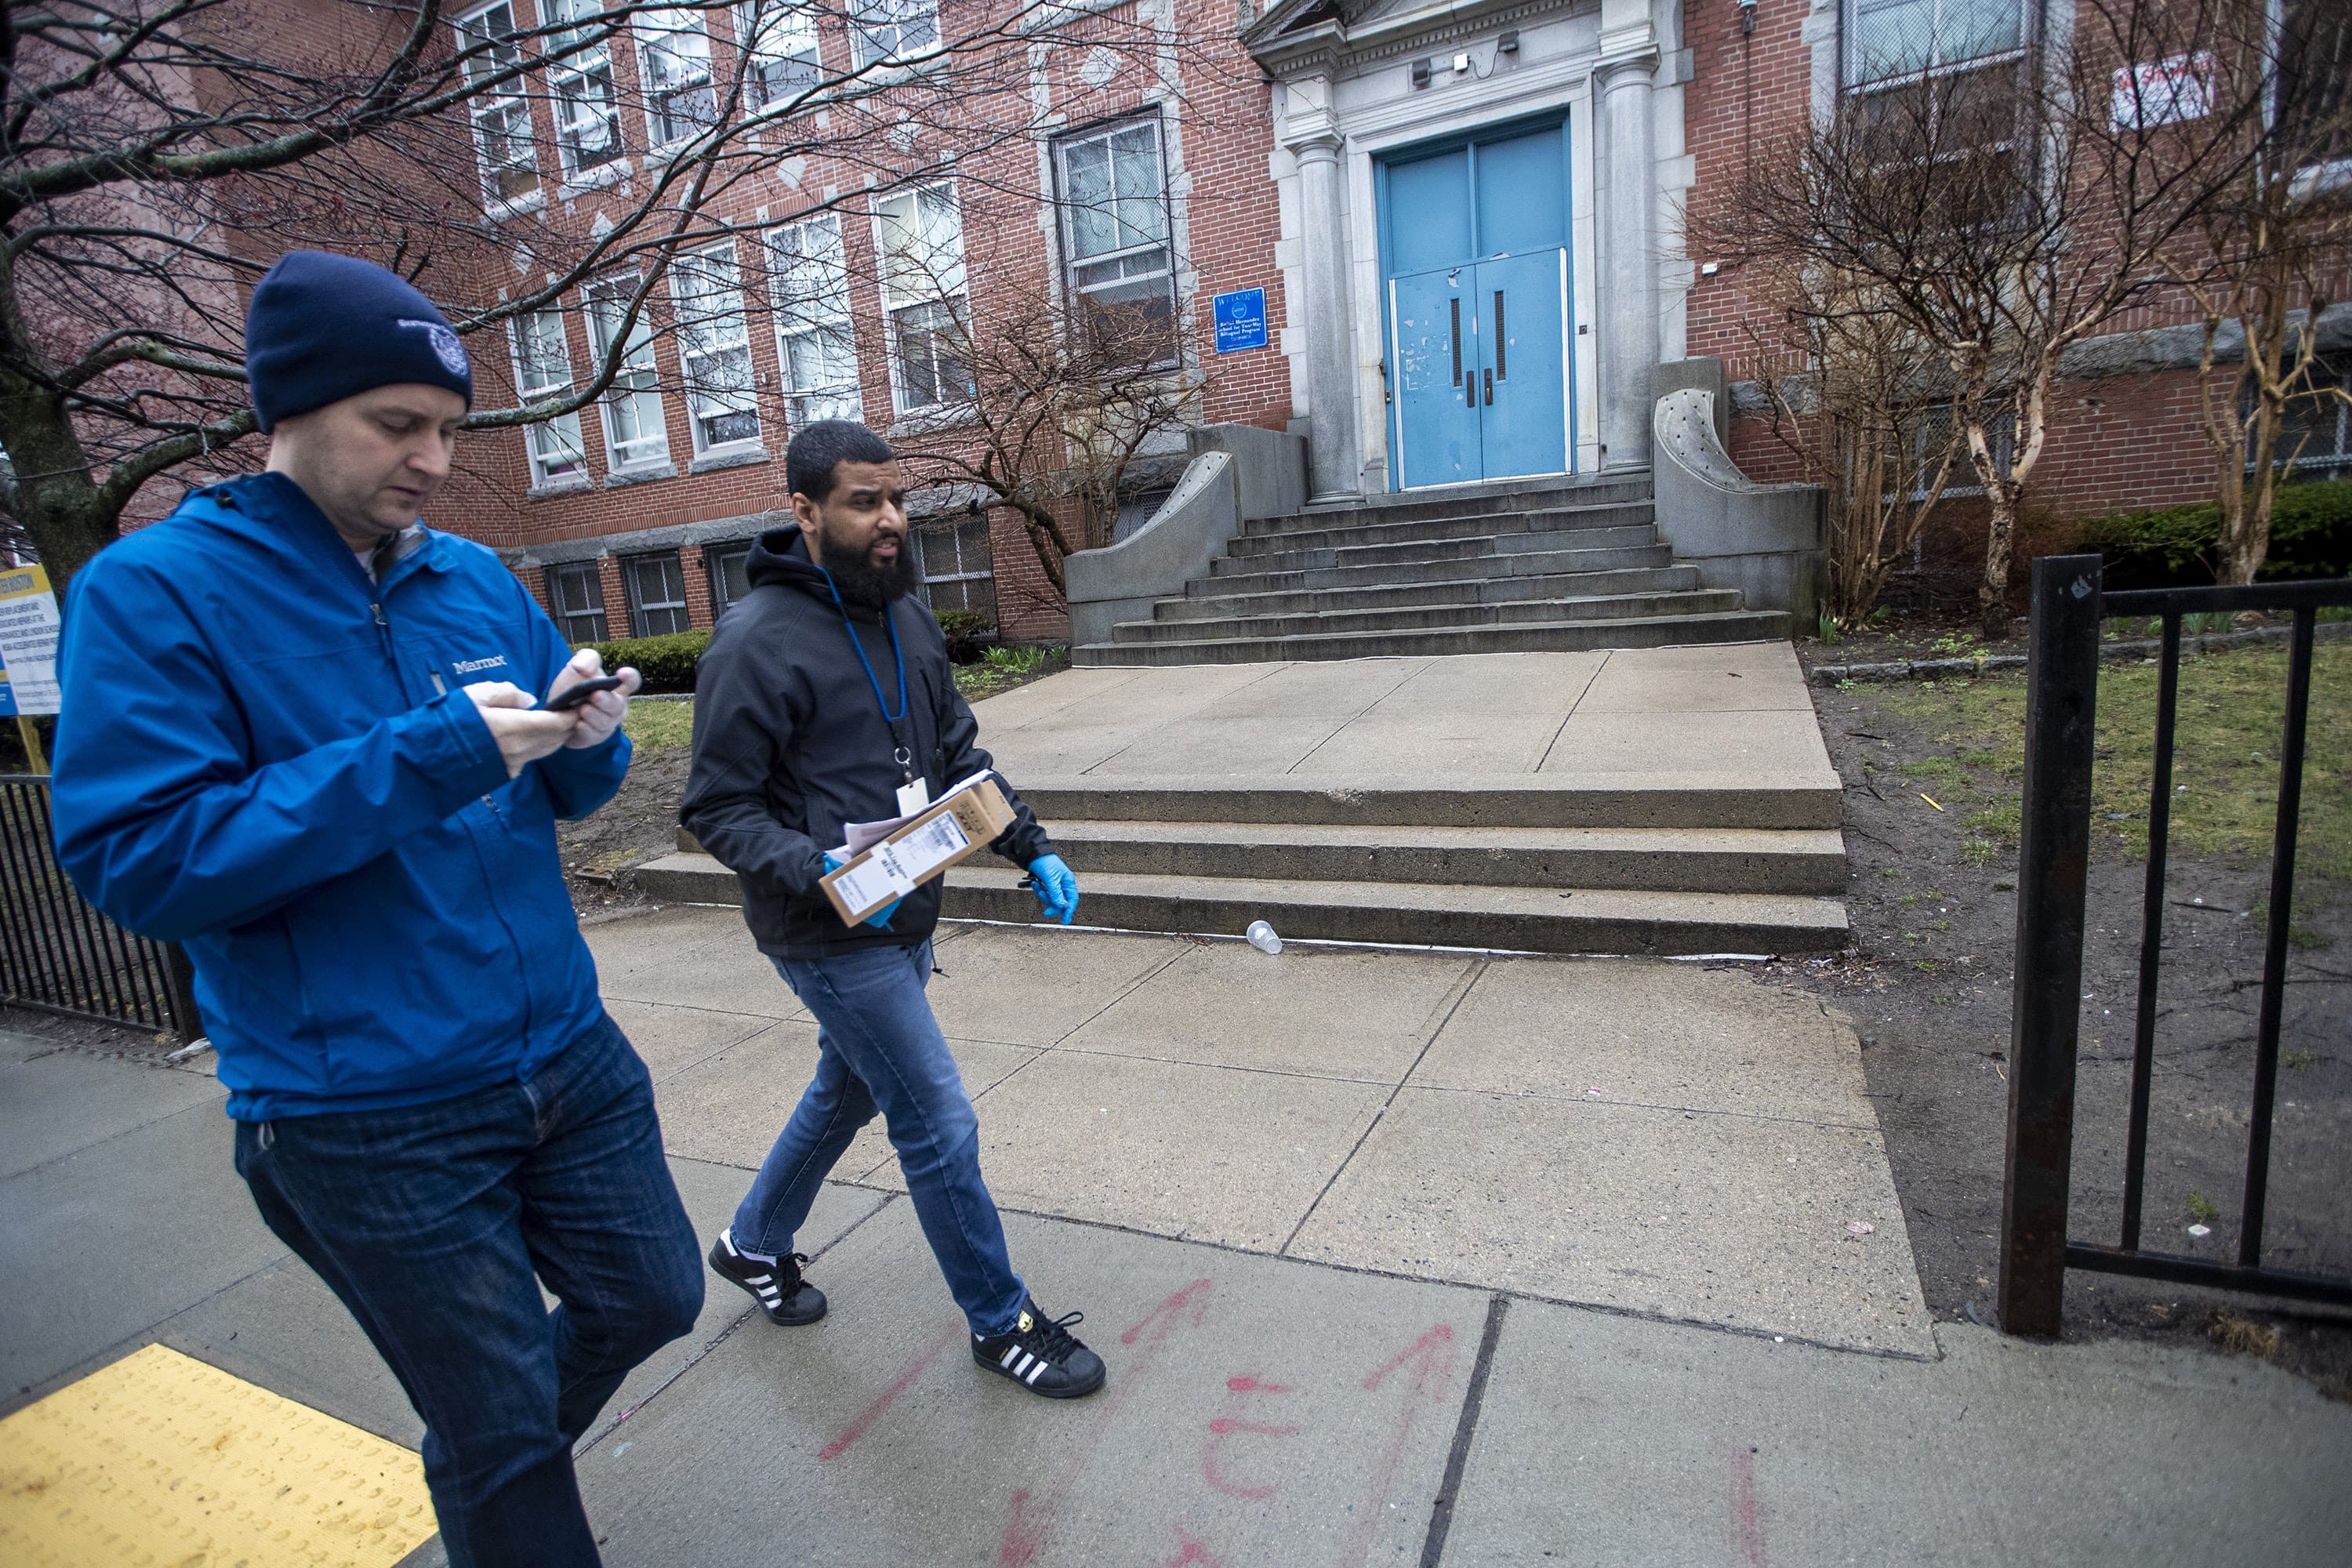 Mark Racine, Director of Development at BPS, and Giscar Centeio walk past the Rafael Hernandez K-8 Elementary School enroute to deliver a Chromebook to a student in Roxbury. (Jesse Costa/WBUR)